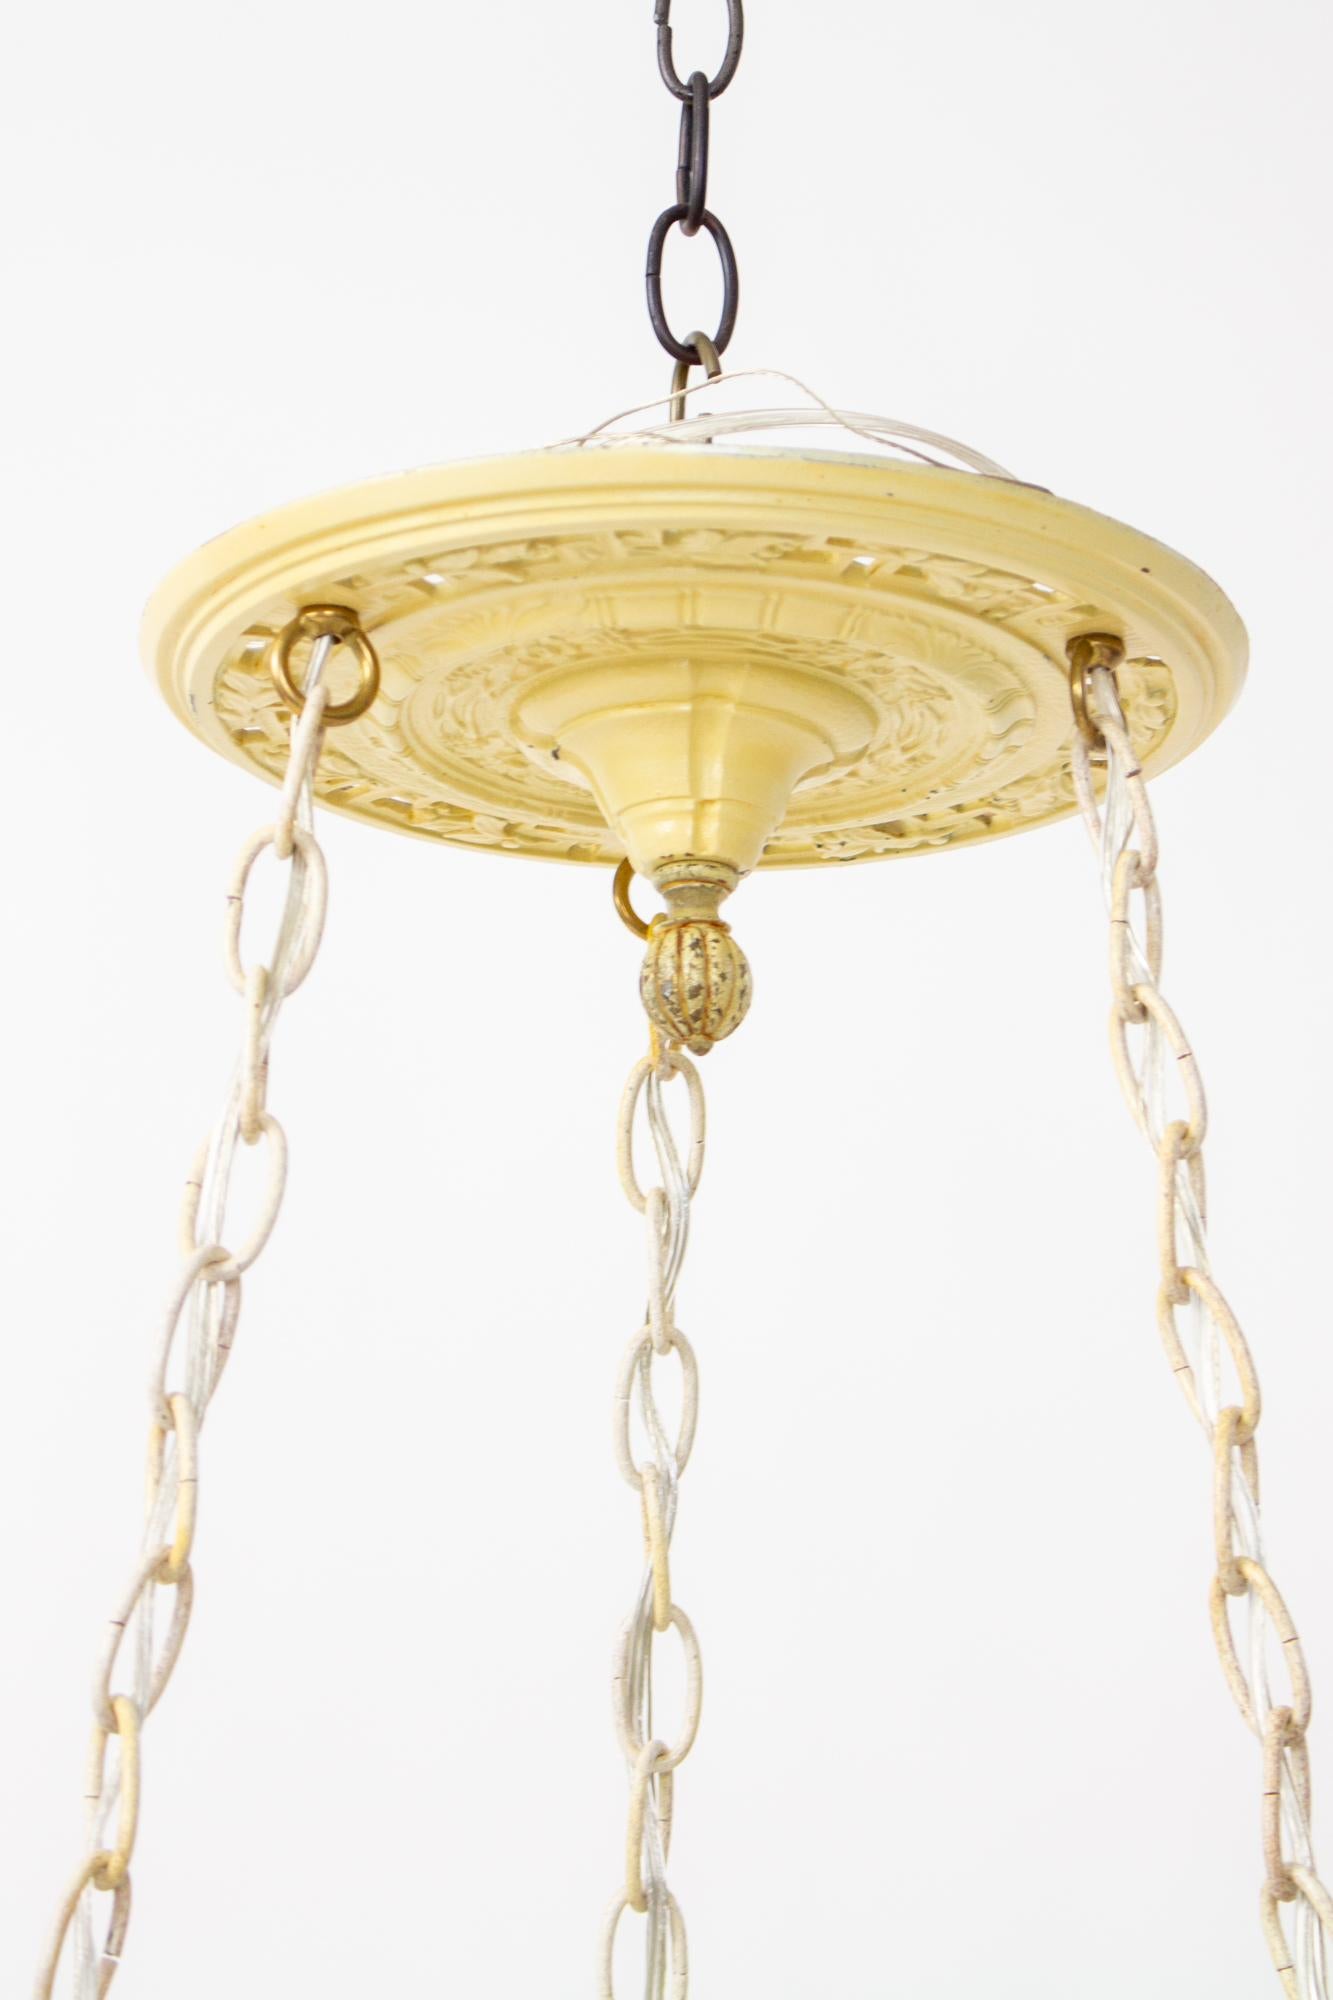 Early 20th Century glass flower bowl fixture. A frosted glass bowl fixture with reverse painted yellow flowers. The bowl is lit by three lights and hangs from three chains. The chain and canopy are ivory with the original painted finish. The canopy